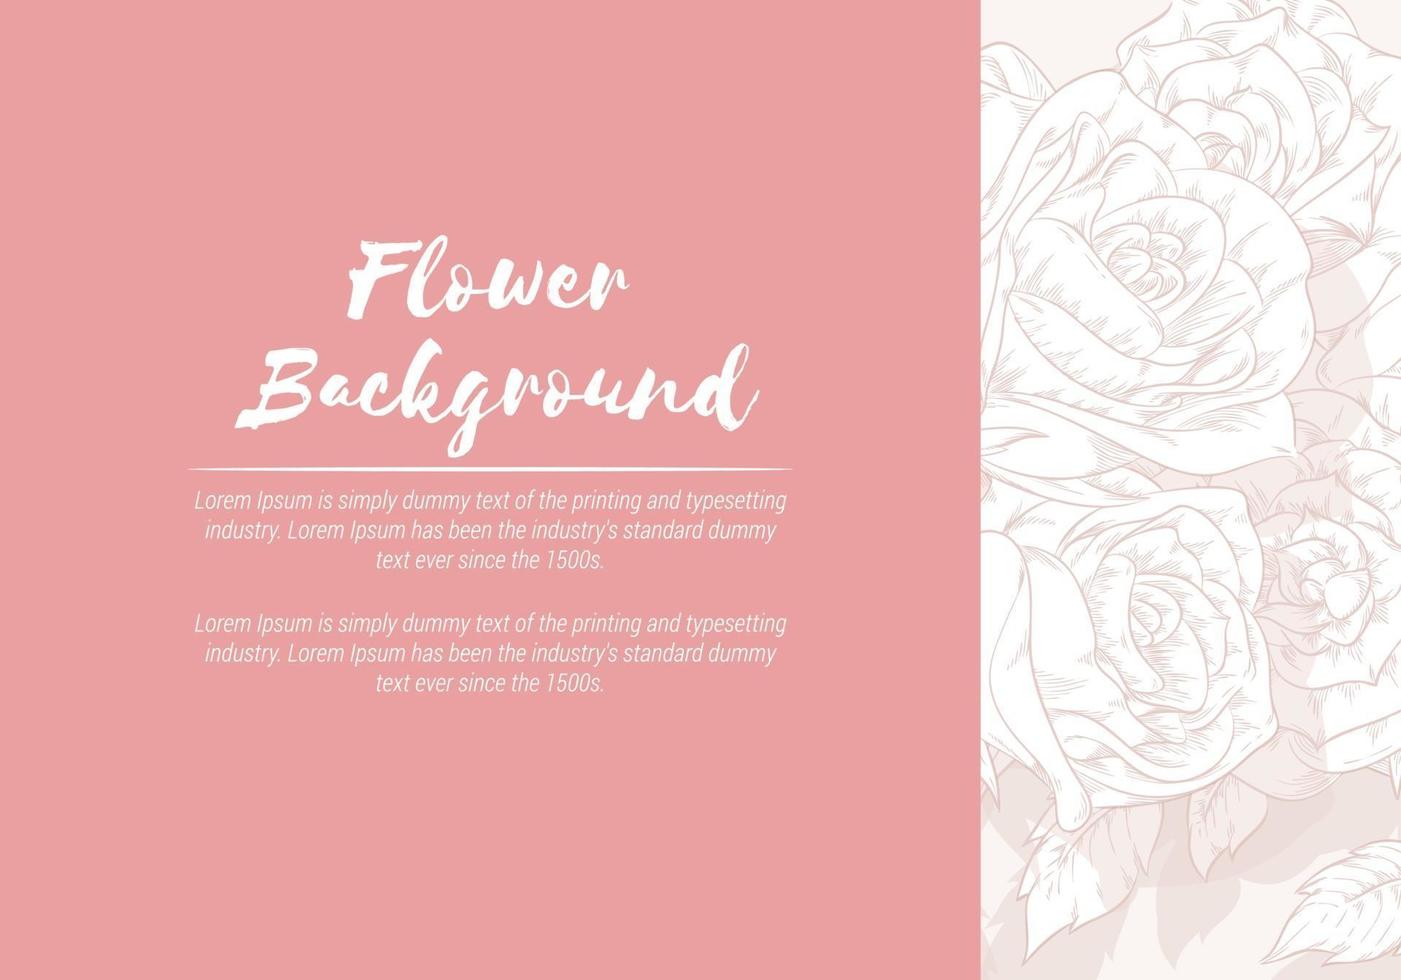 Background of Floral Hand Drawn Rose, Sketch Template Vector Layout